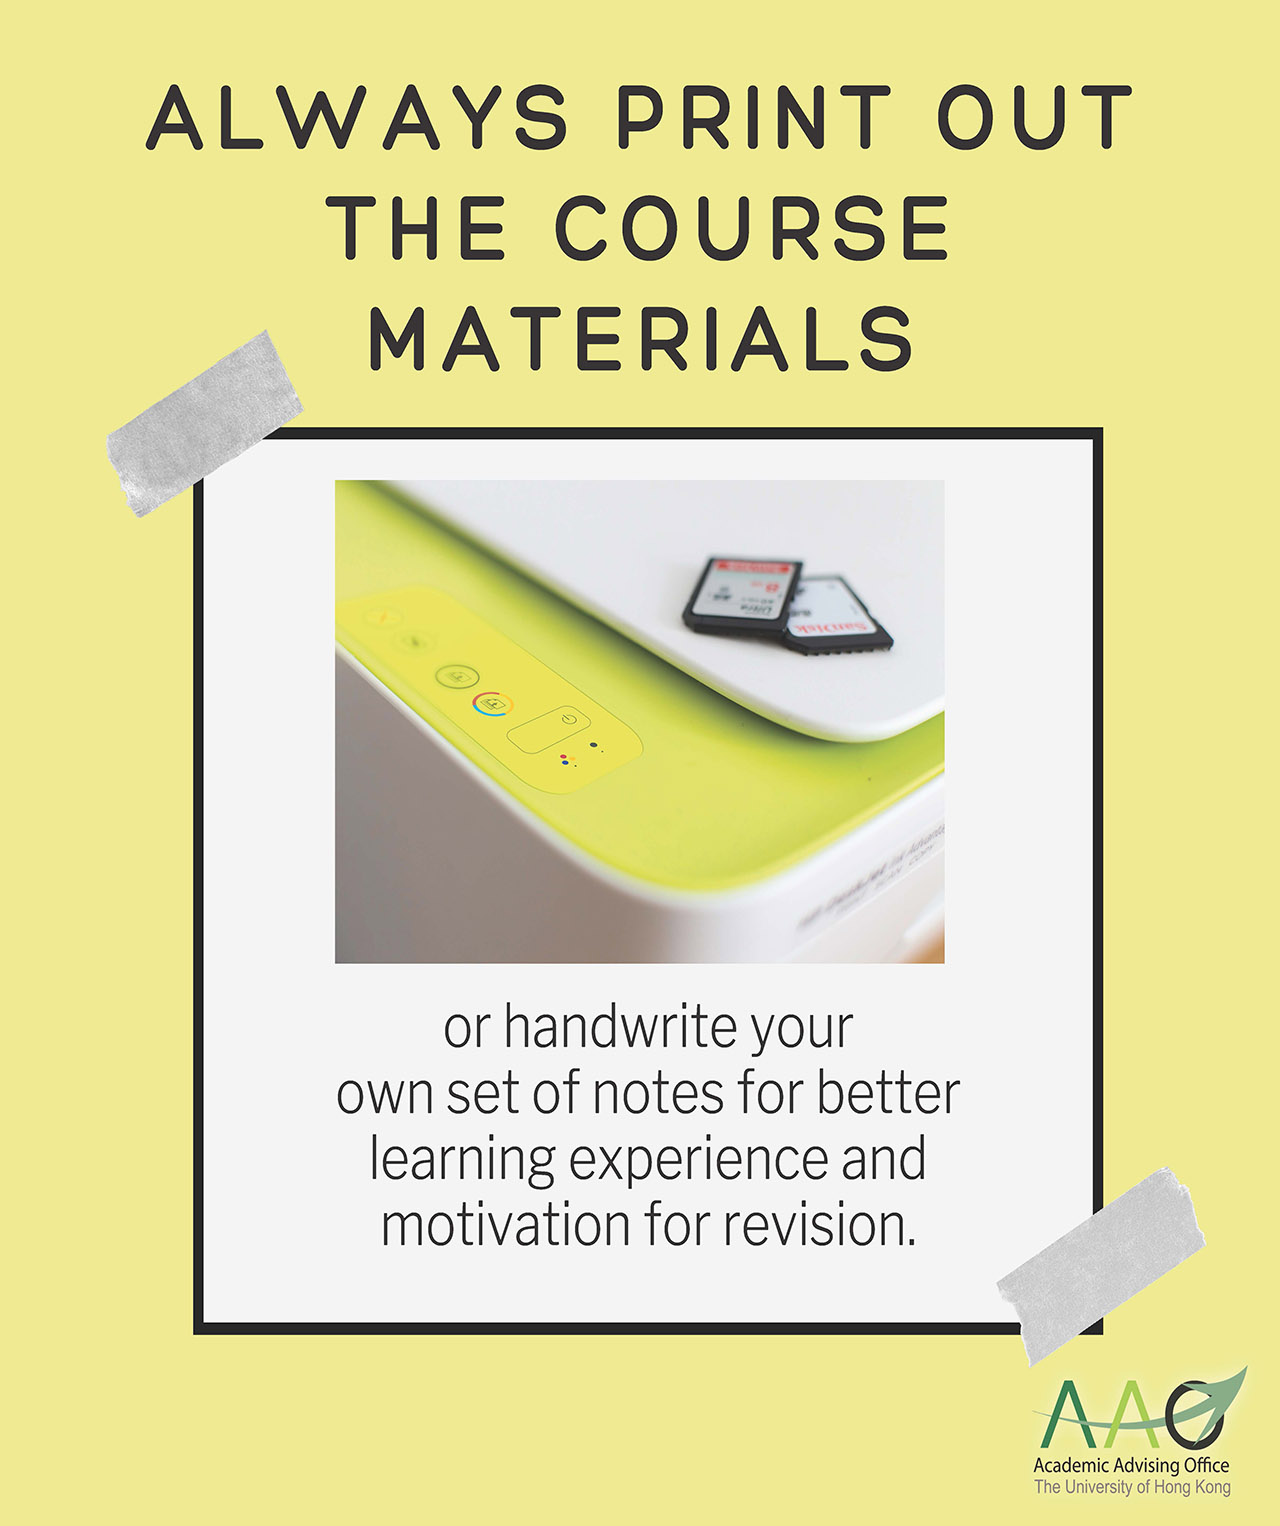 Always print out the course materials or handwrite your own set of notes for better learning experience and motivation for revision.